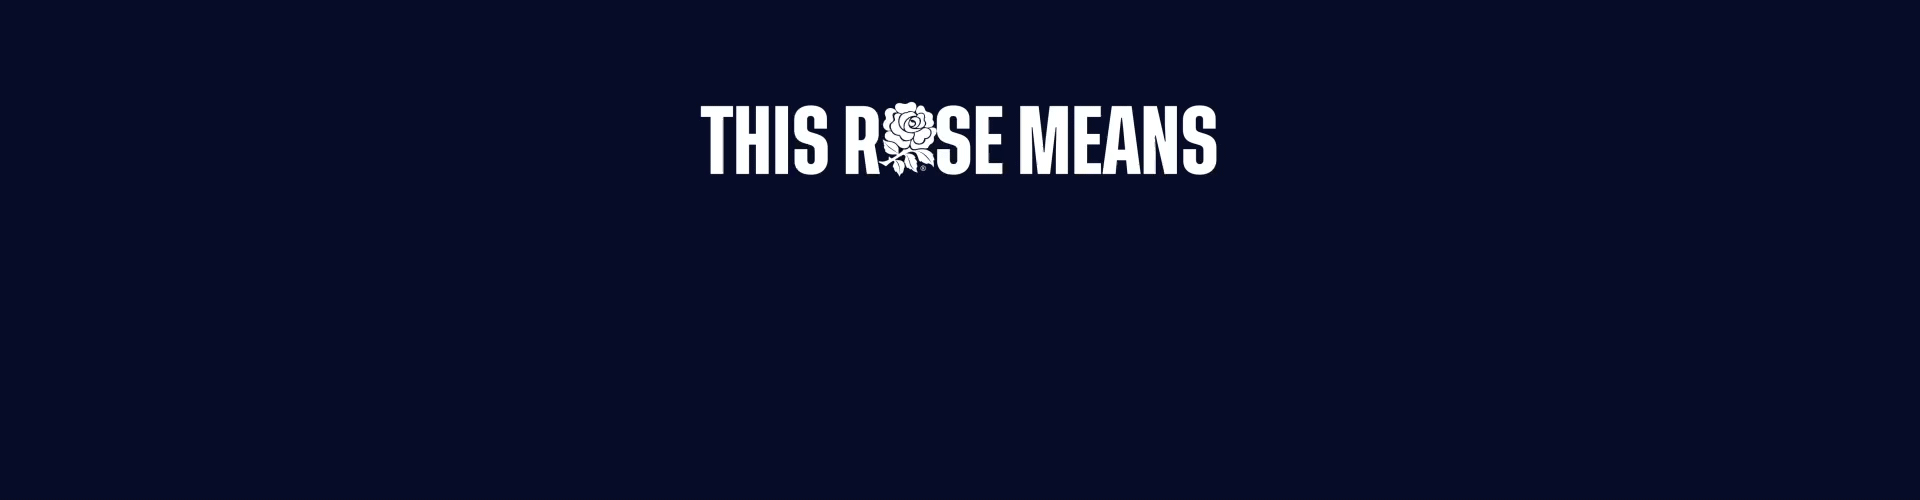 'THIS ROSE MEANS EVERYTHING' animated typography lock up in white